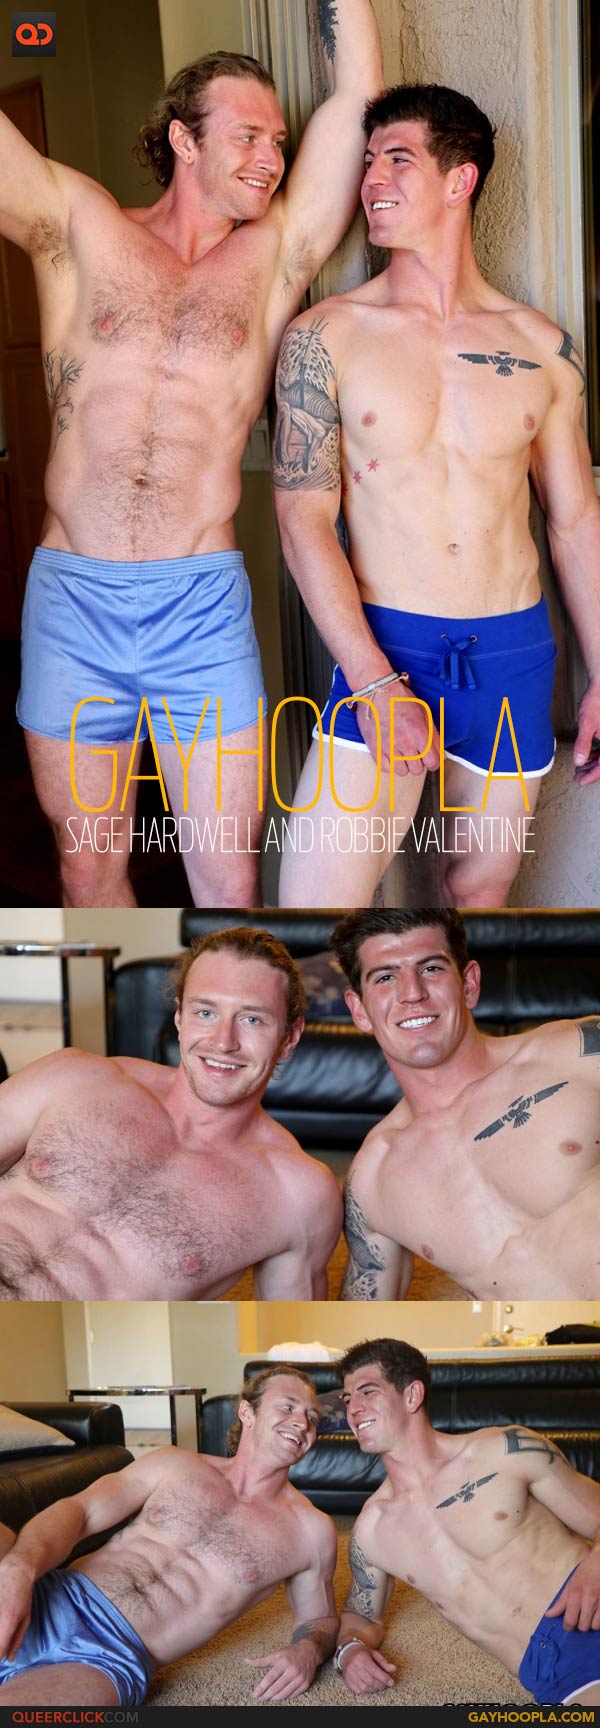 GayHoopla: Sage Hardwell Blows his Load all Over Robbie Valentine